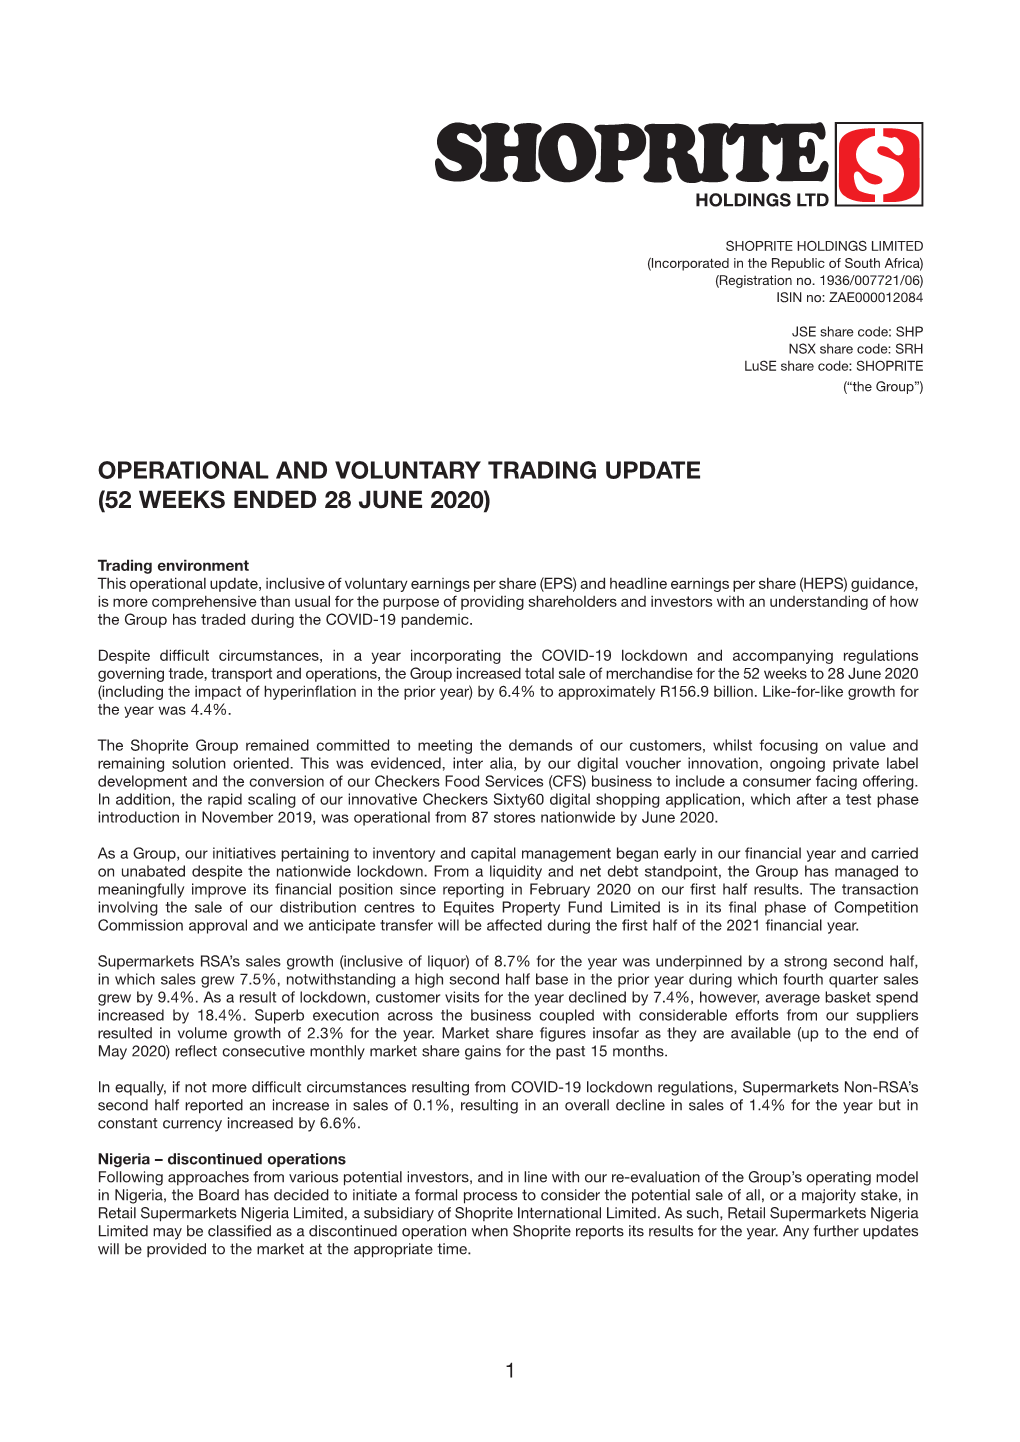 Operational and Voluntary Trading Update (52 Weeks Ended 28 June 2020)